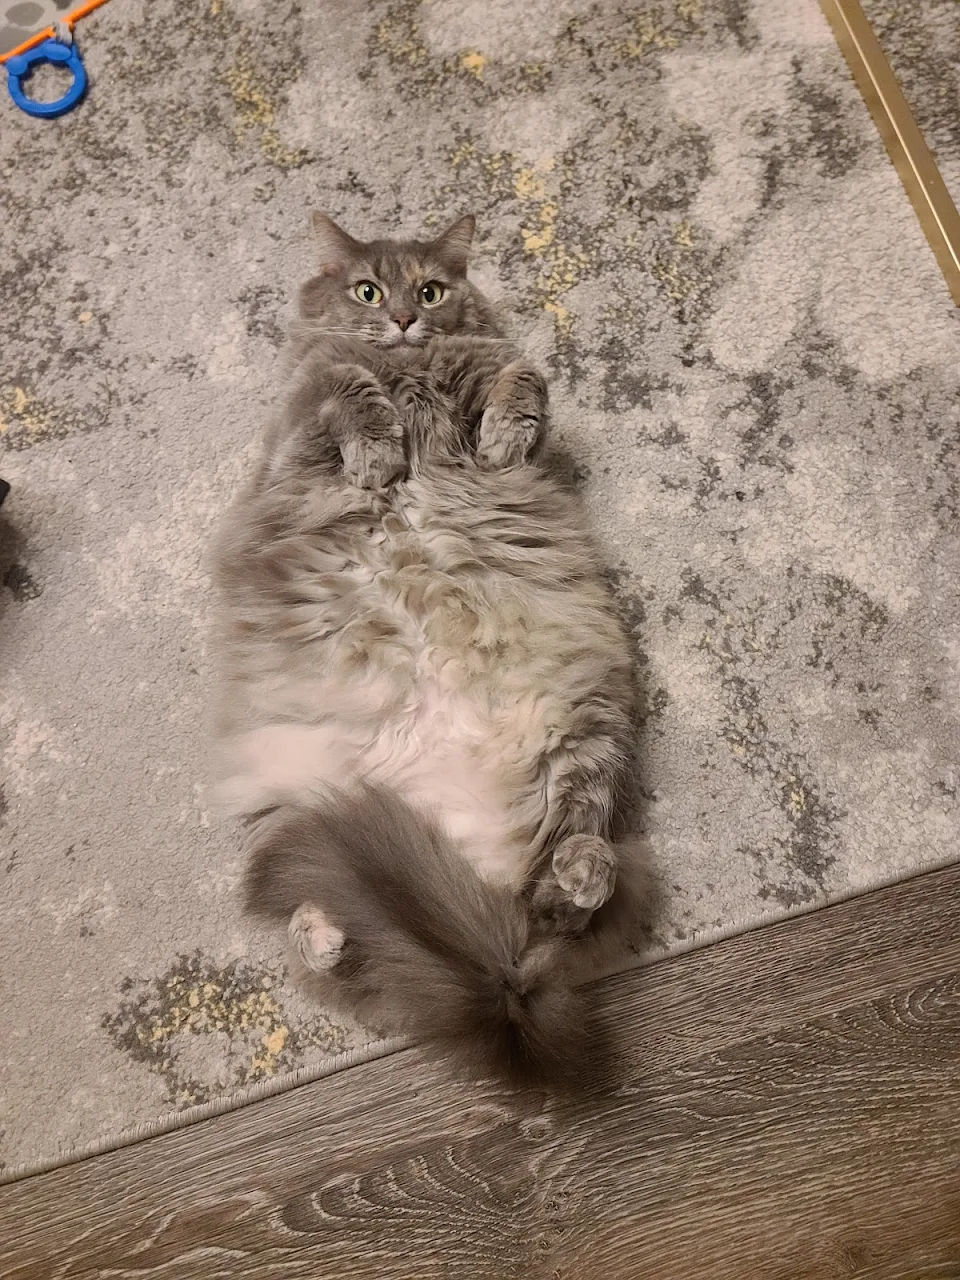 Luna cat. she's fluffy. she will chomp if you touch the belly.